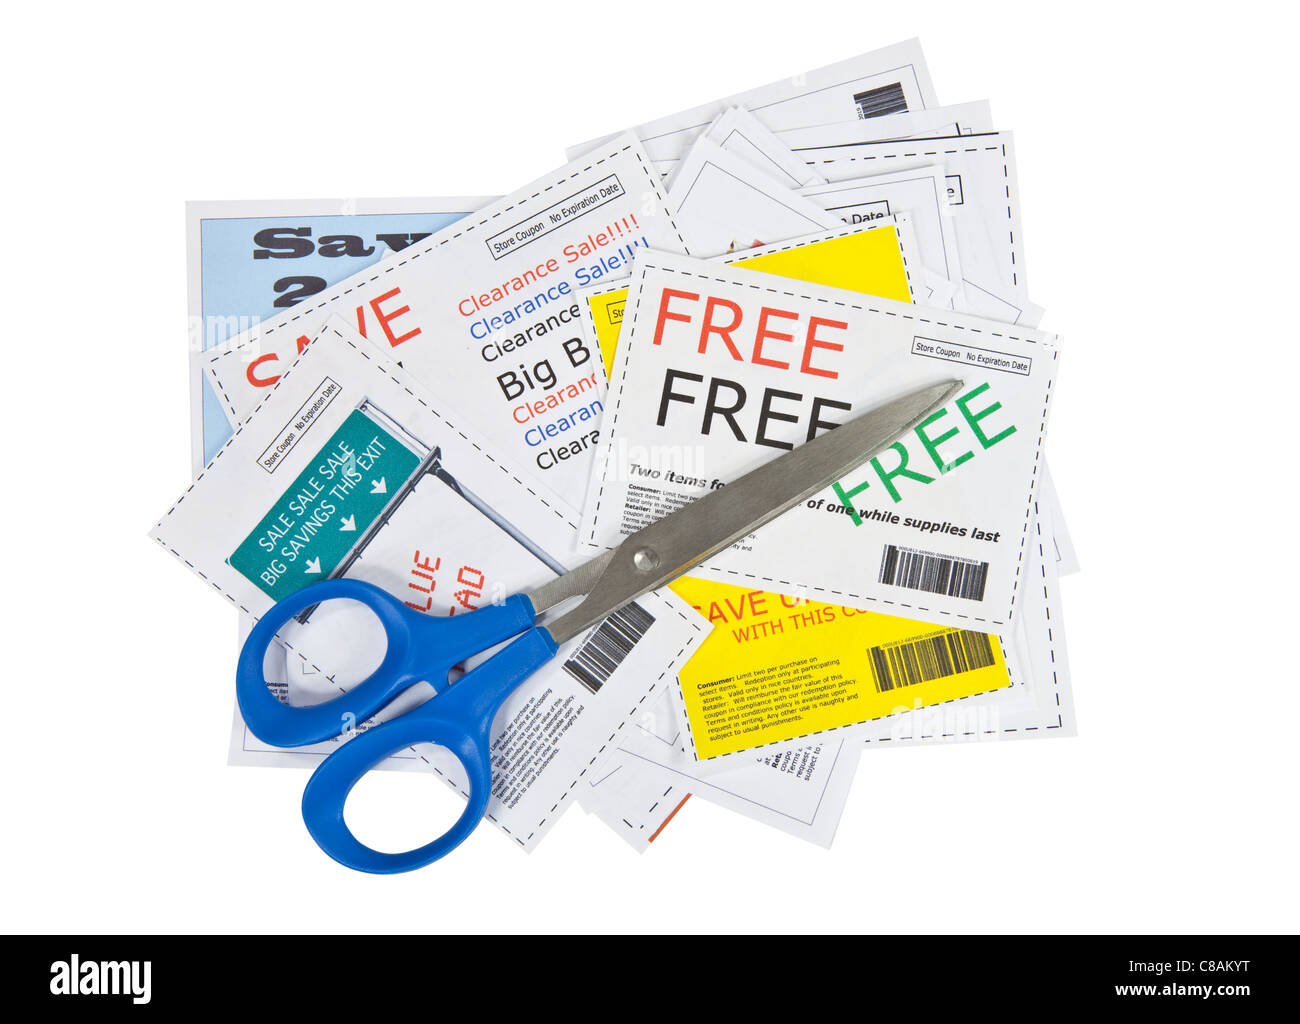 Completely fake store coupons with scissors. Stock Photo